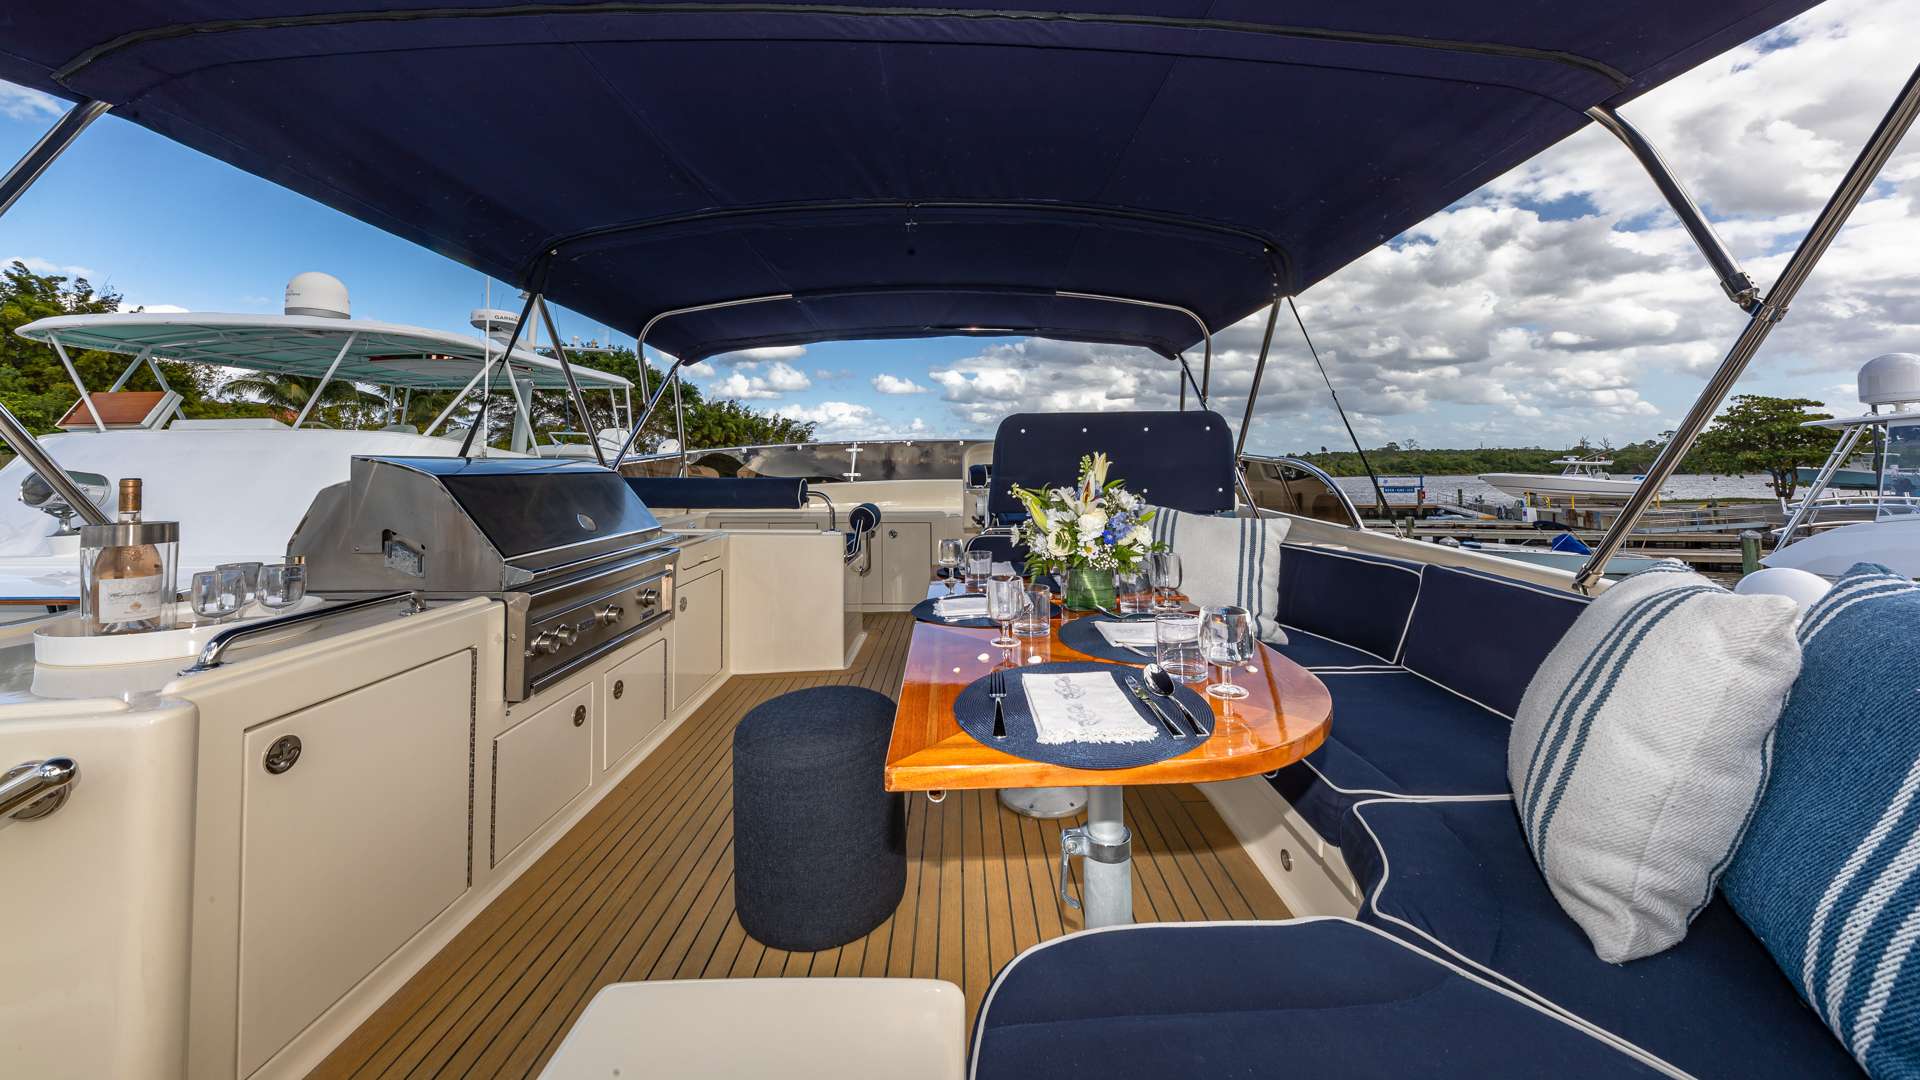 FALCON Yacht Charter - Flybridge Lounge - Cocktail Cruise